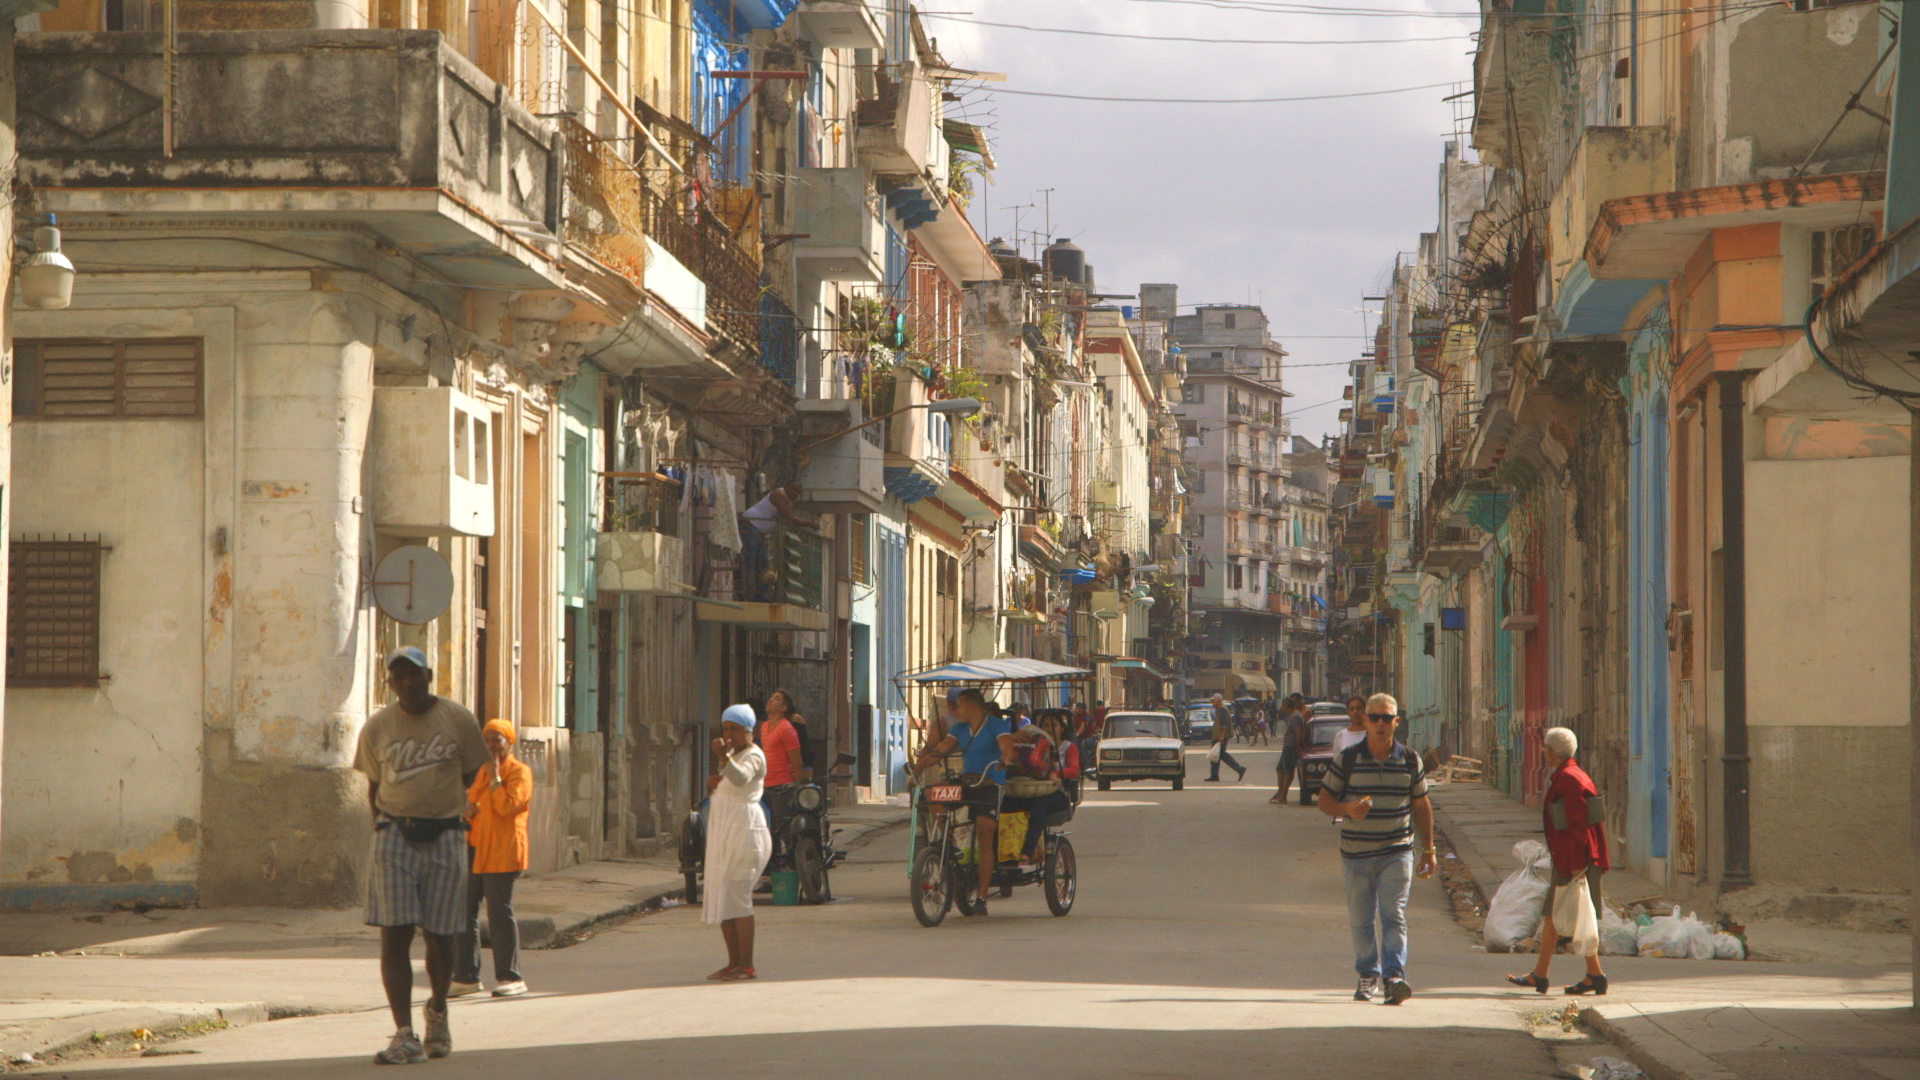  CUBA- Havana Calle.
(Photo Credit: National Geographic Channels) 